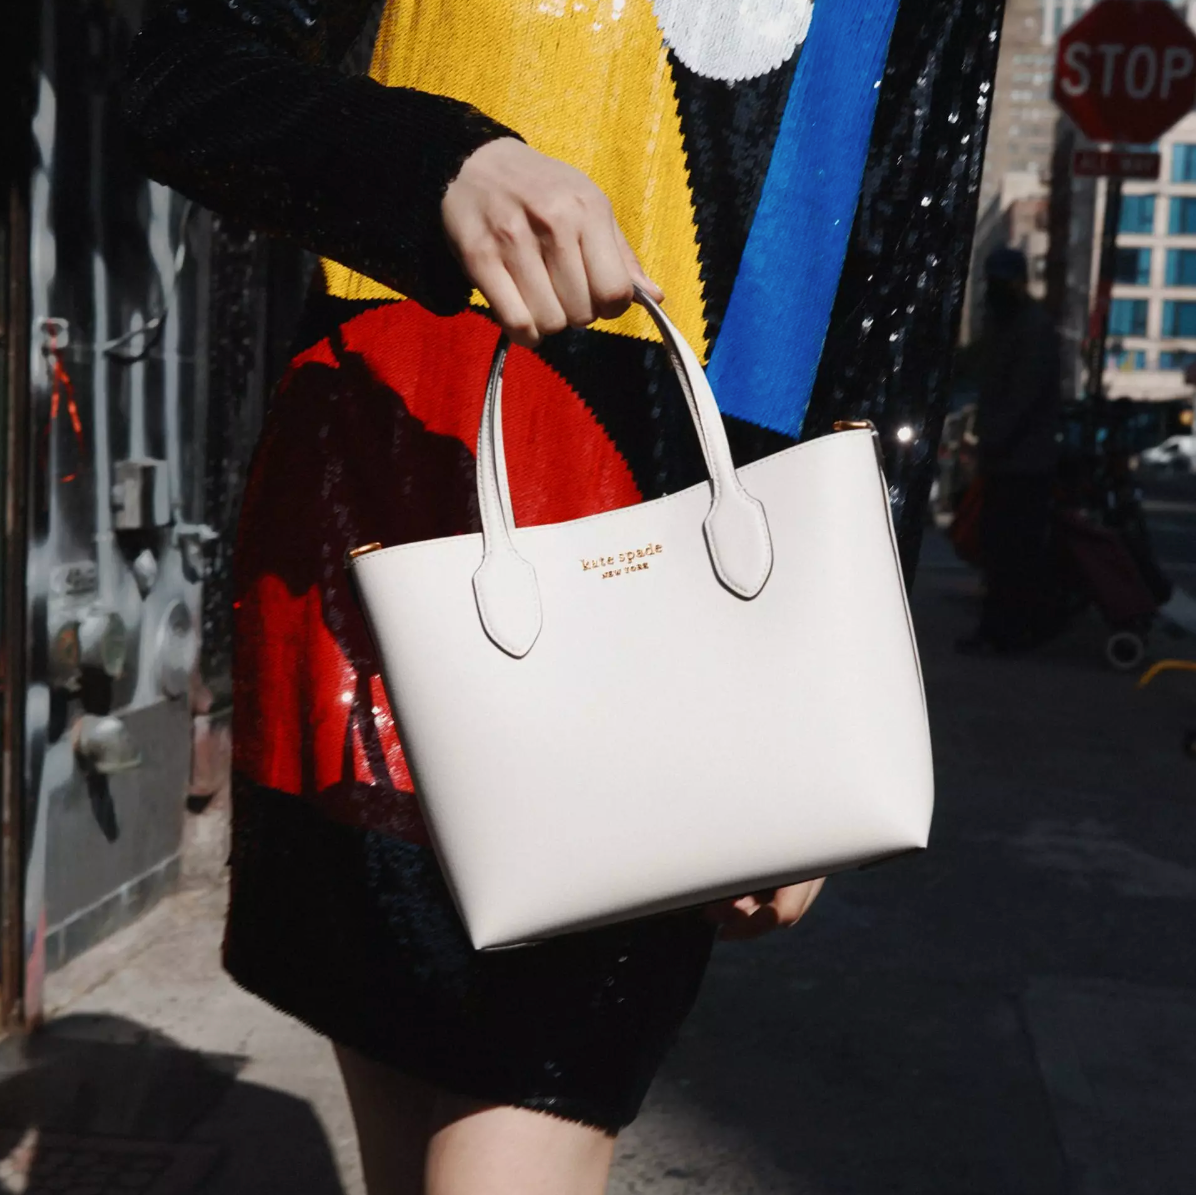 Kate Spade Labor Day Sale 2023: Save Up to 60% on Handbags